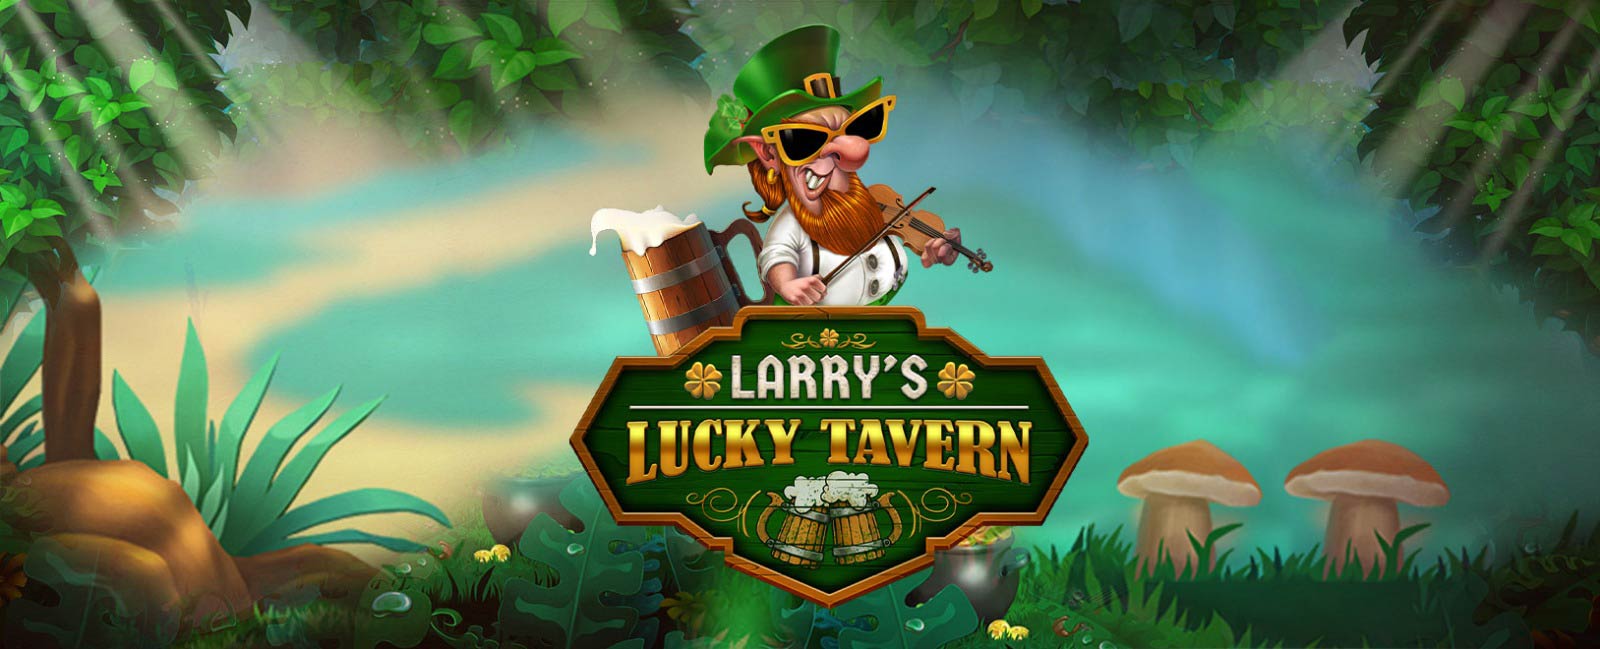 Cafe’s March Slot of the Month: Larry’s Lucky Tavern